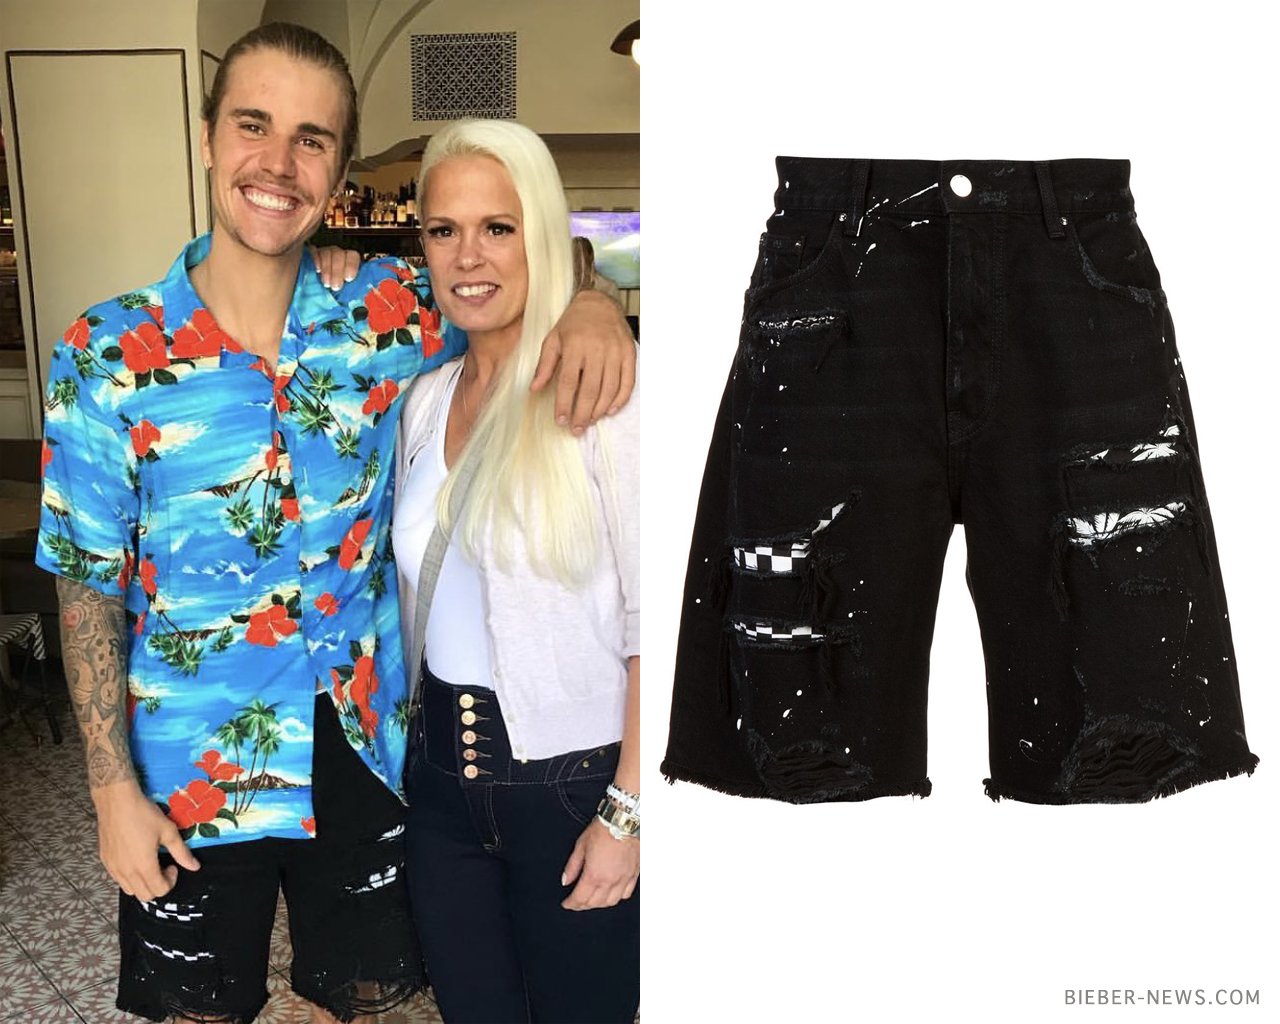 Justin Bieber News on "Fashion: $385.00 Amiri Art Patch Denim Shorts in Black that's available here https://t.co/CKb9WtncEe https://t.co/GVDY3ZzjRw" / Twitter